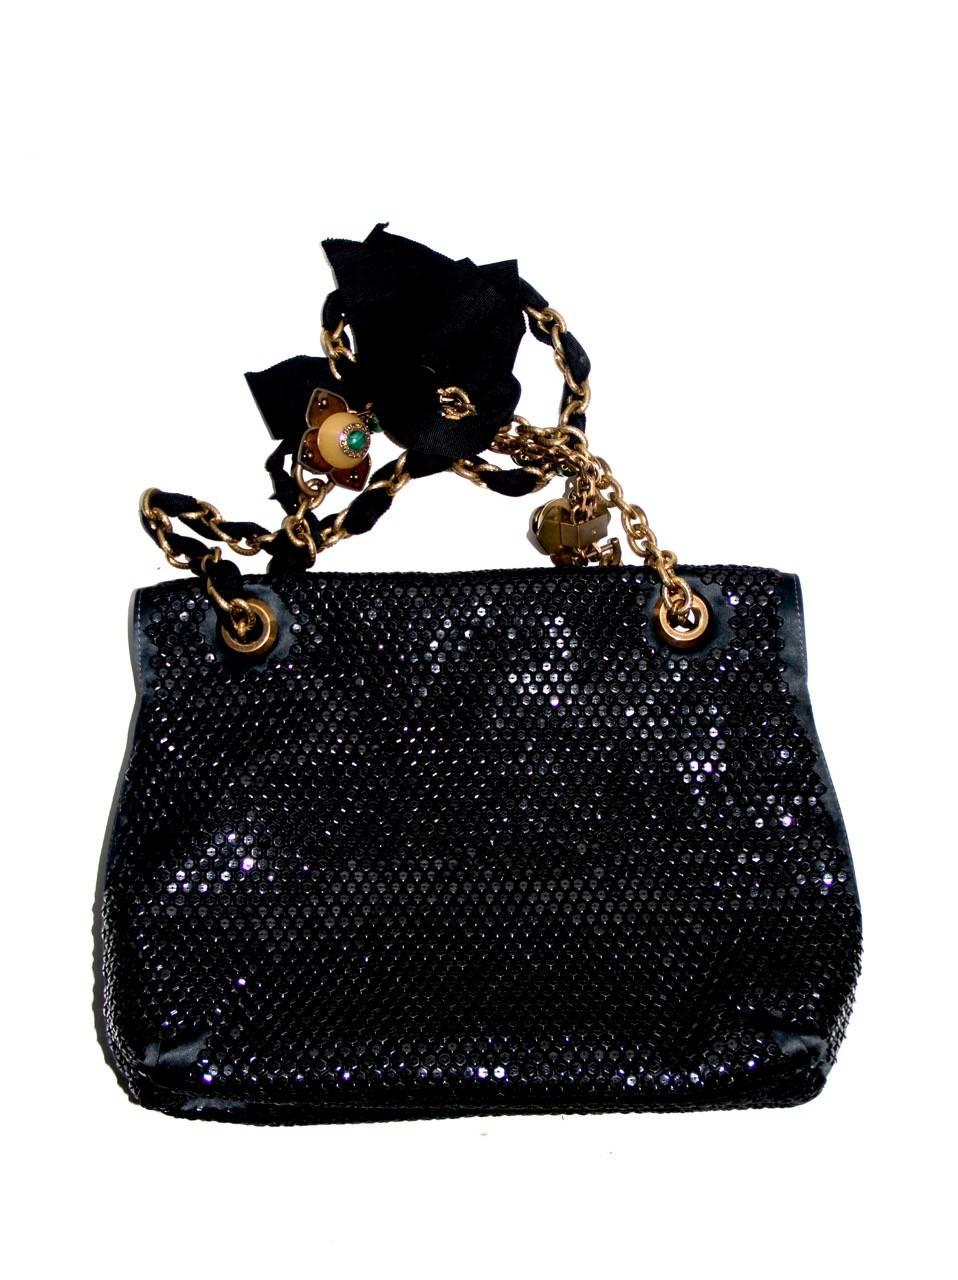 Amazing and sophisticated Lanvin bag that highlights the brand's refined style. Released in 2012 for the Alber Elbaz's tenth anniversary as designer at Lanvin. The bag features streamlined silhouettes and striking forms. Beaded, black sequins and